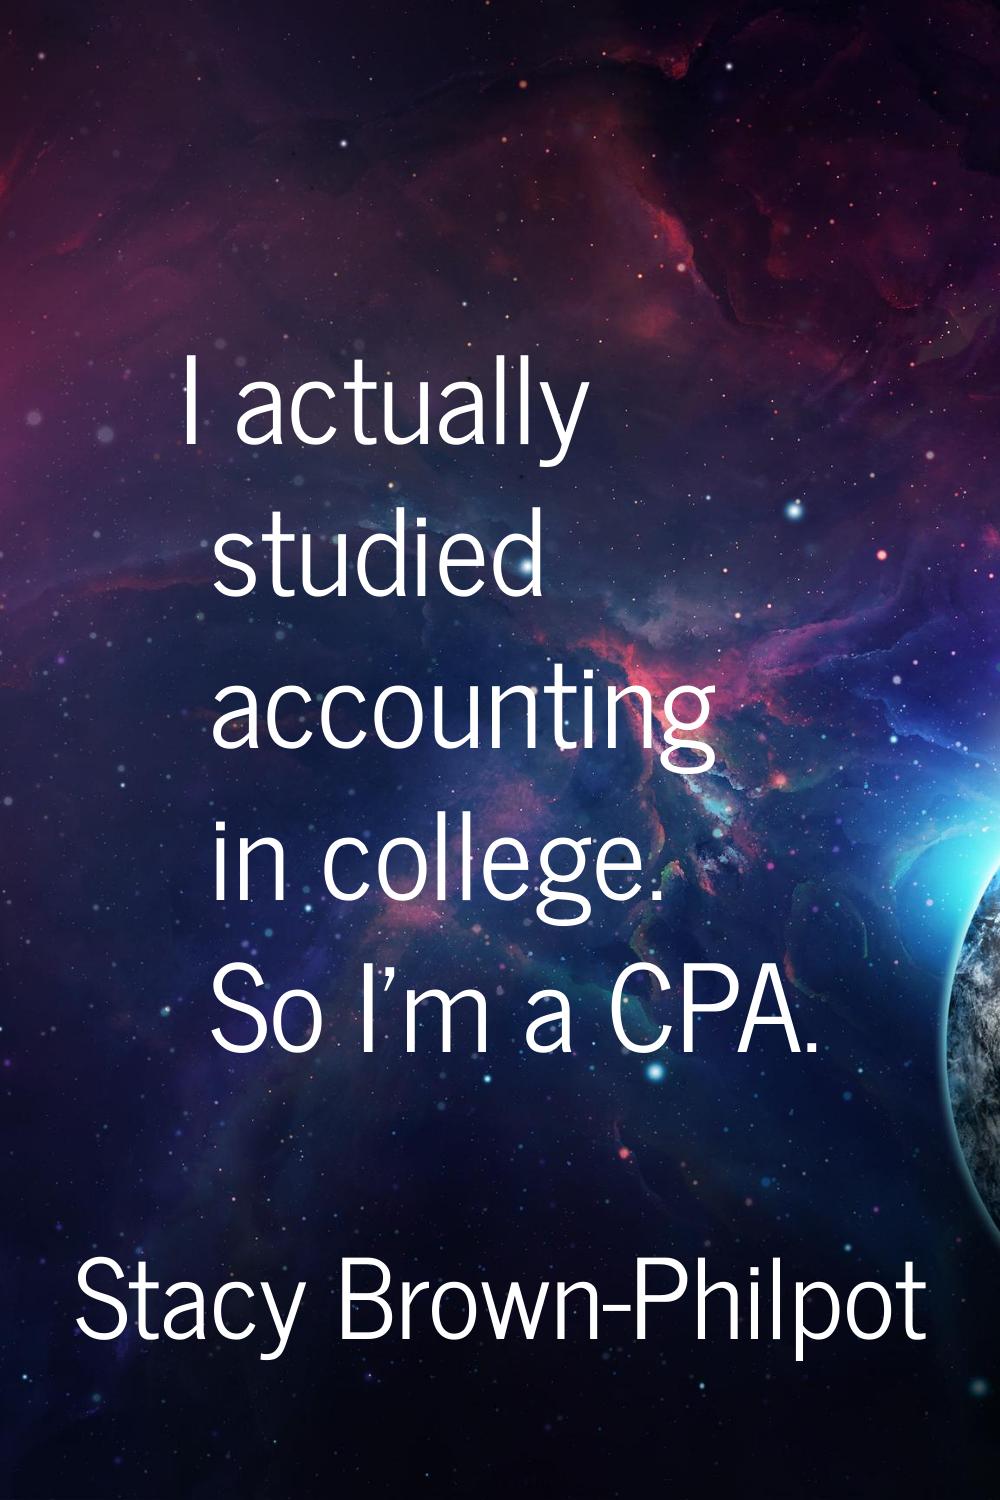 I actually studied accounting in college. So I'm a CPA.